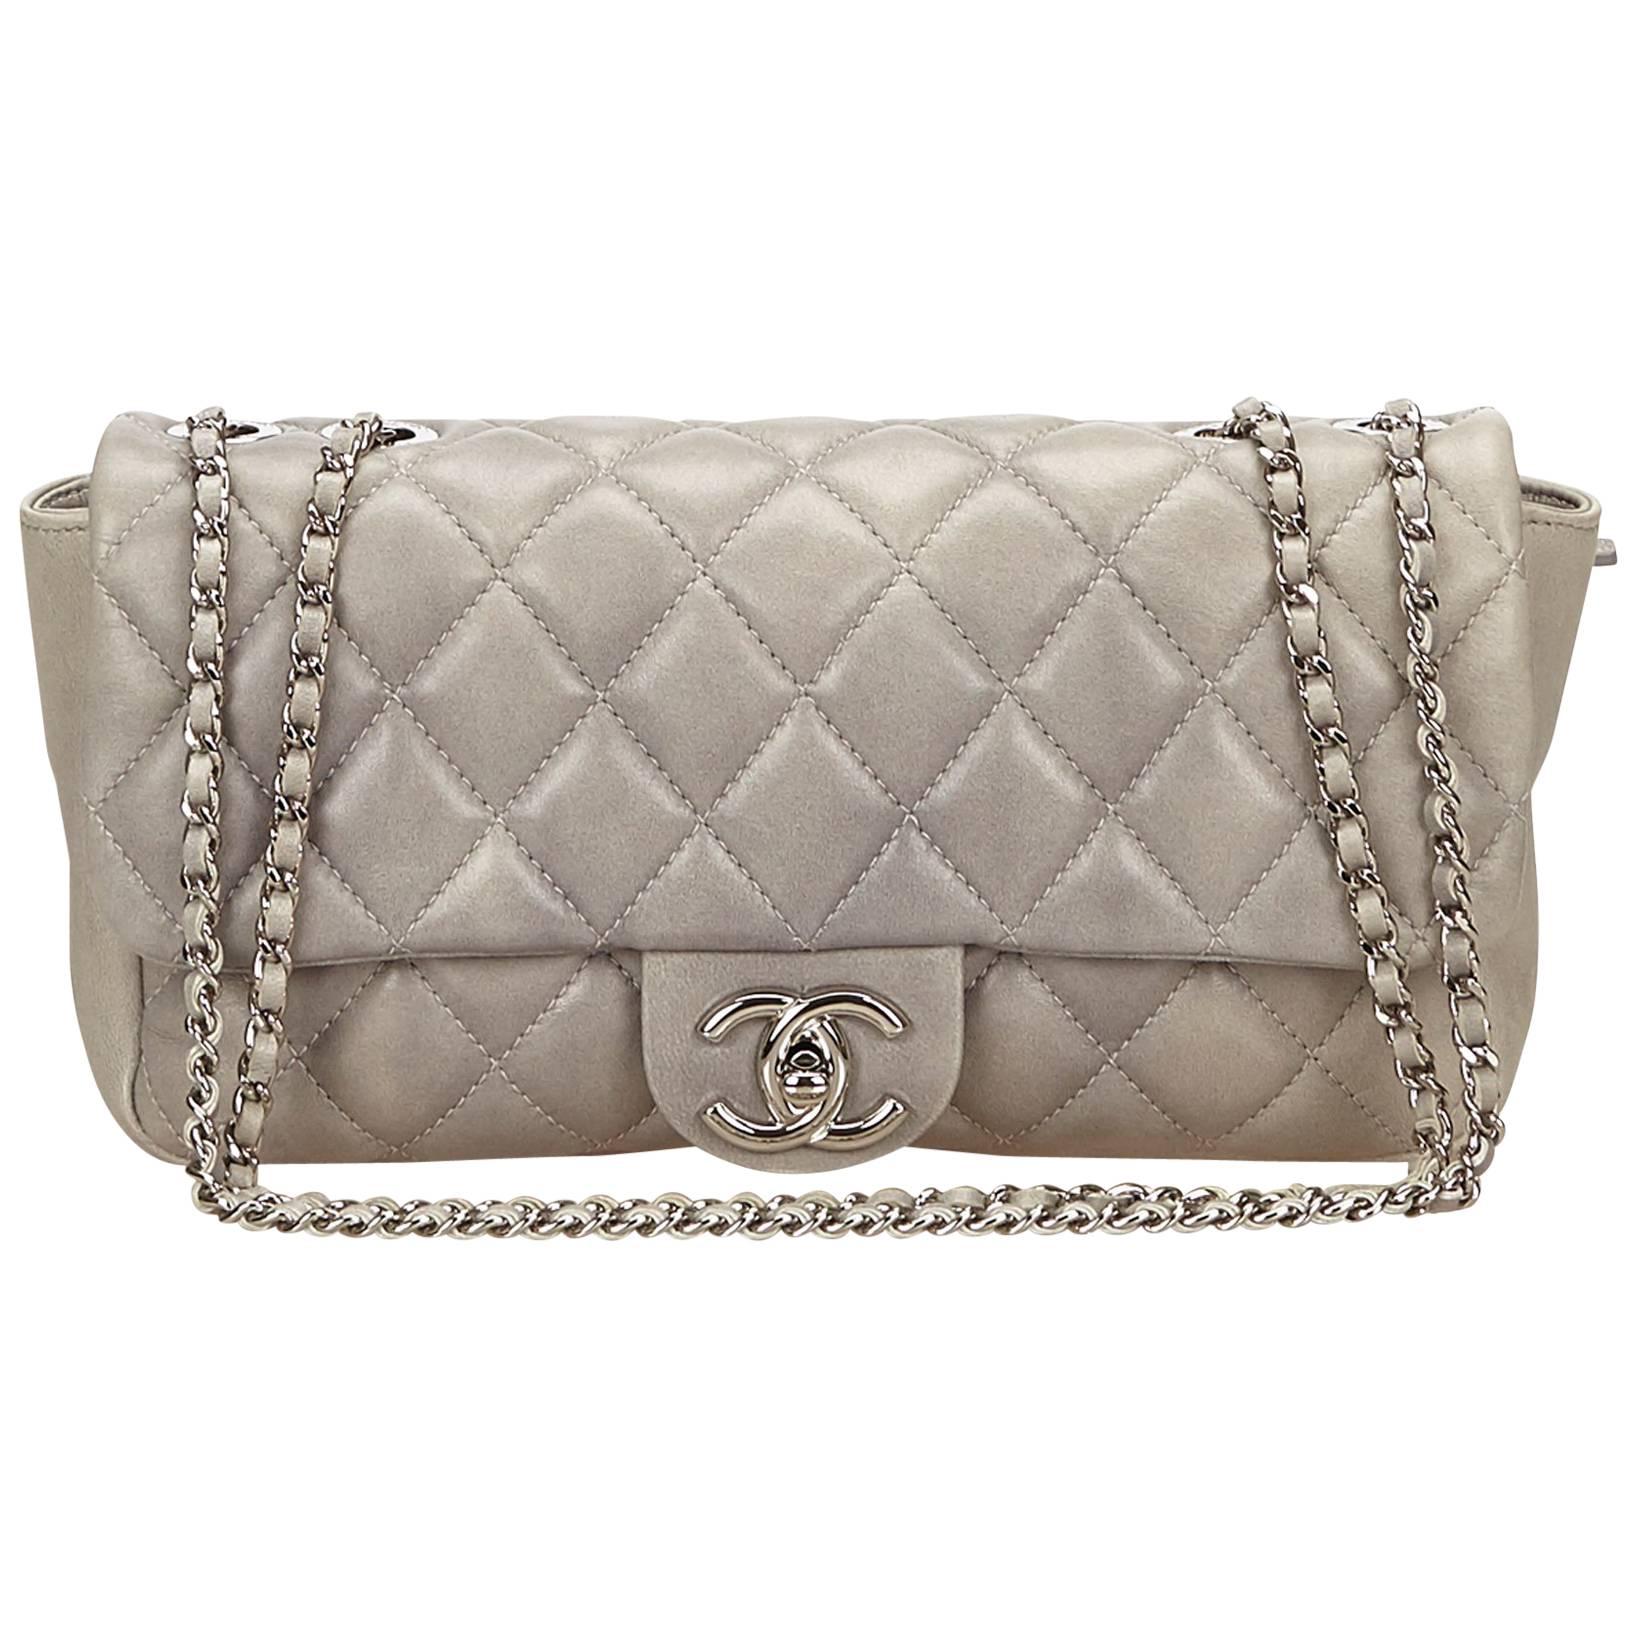 Chanel Gray Matelasse Quilted Lambskin Leather Flap Shoulder Bag 